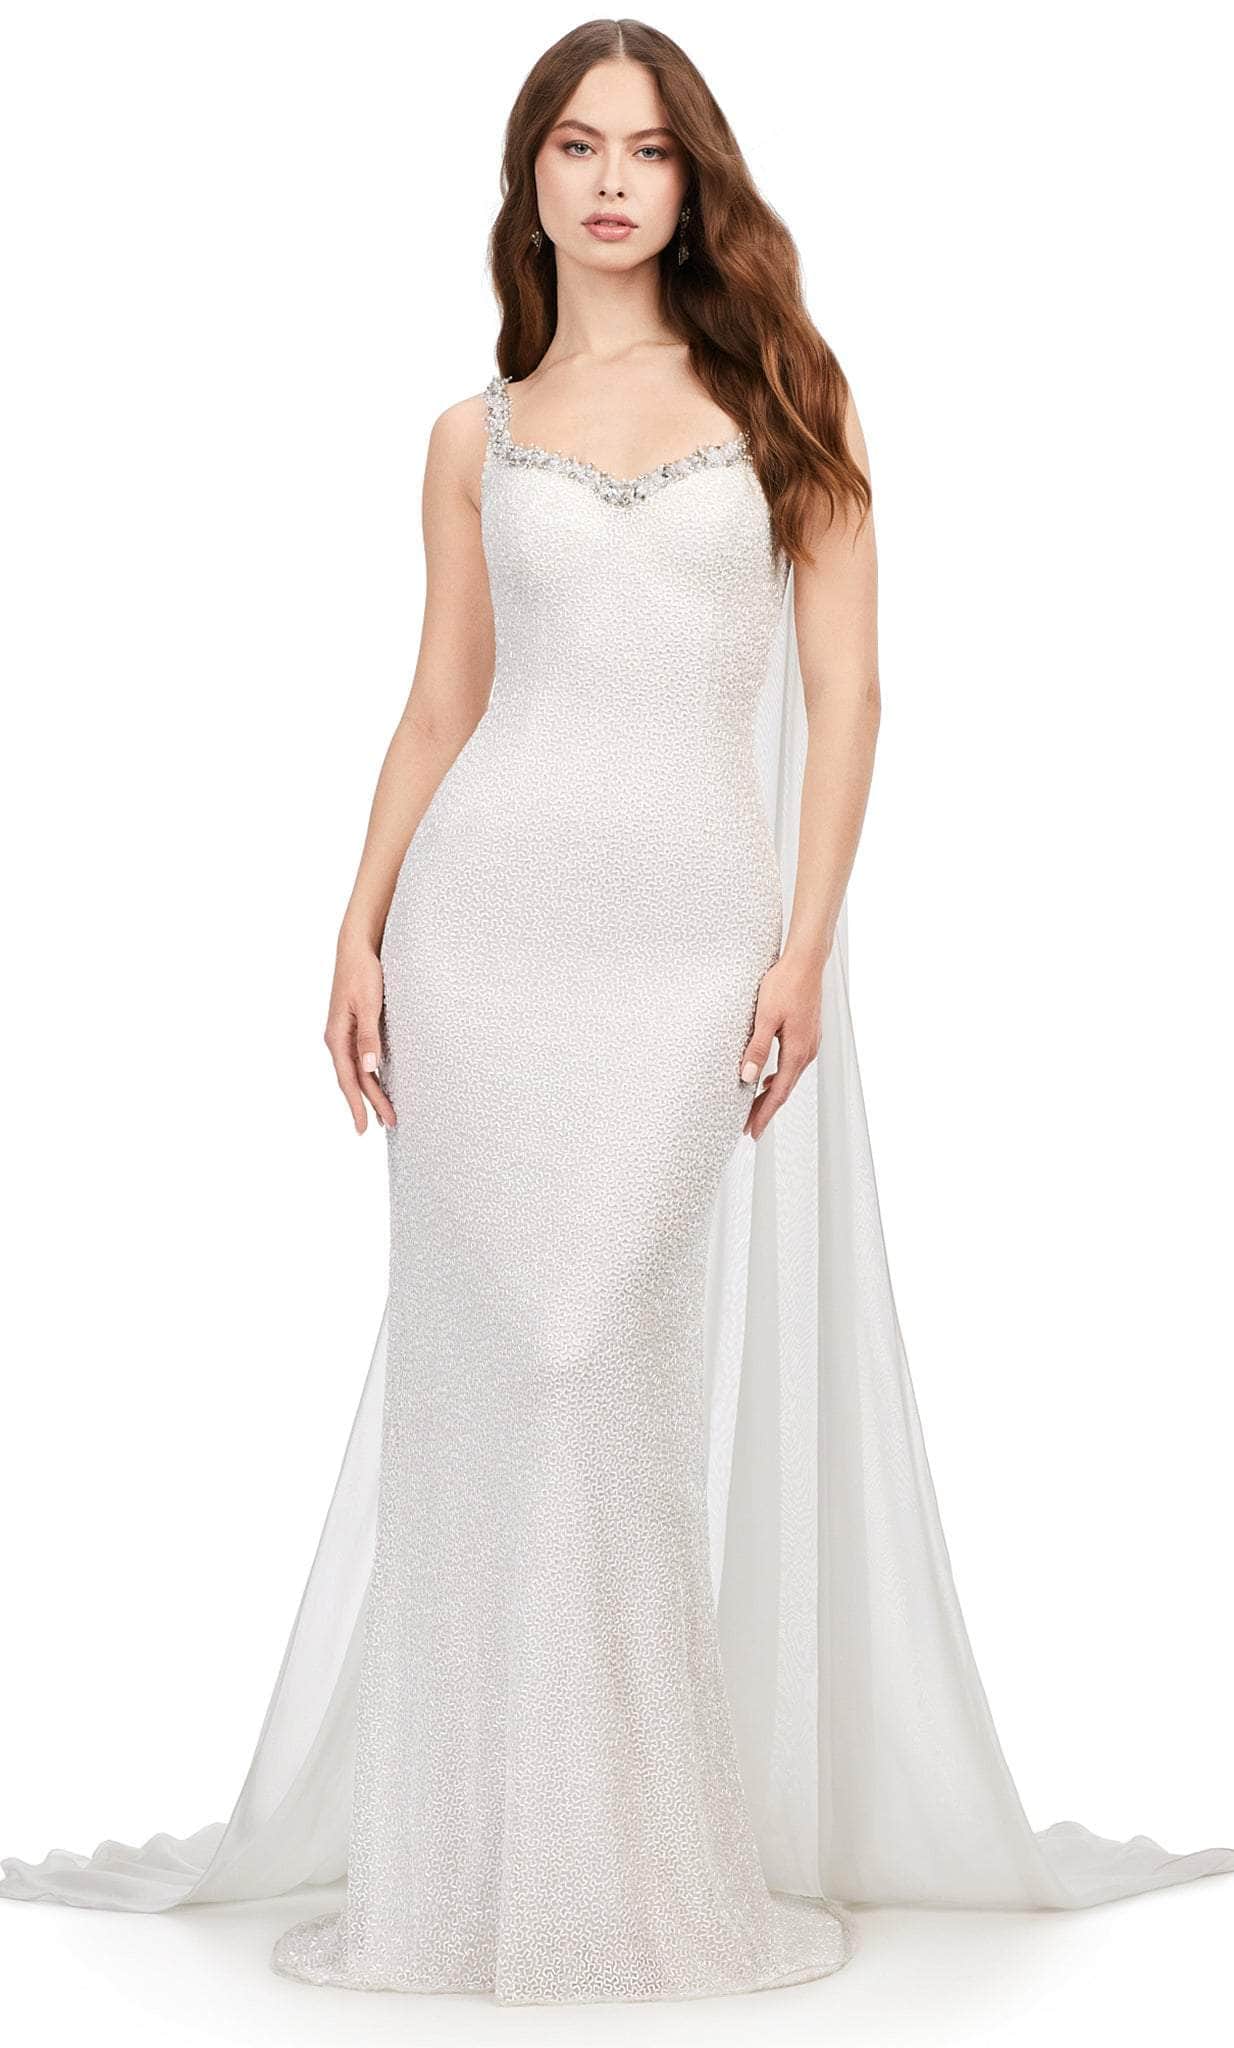 Ashley Lauren 11398 - Vermicelli Beaded Gown with Chiffon Cape
